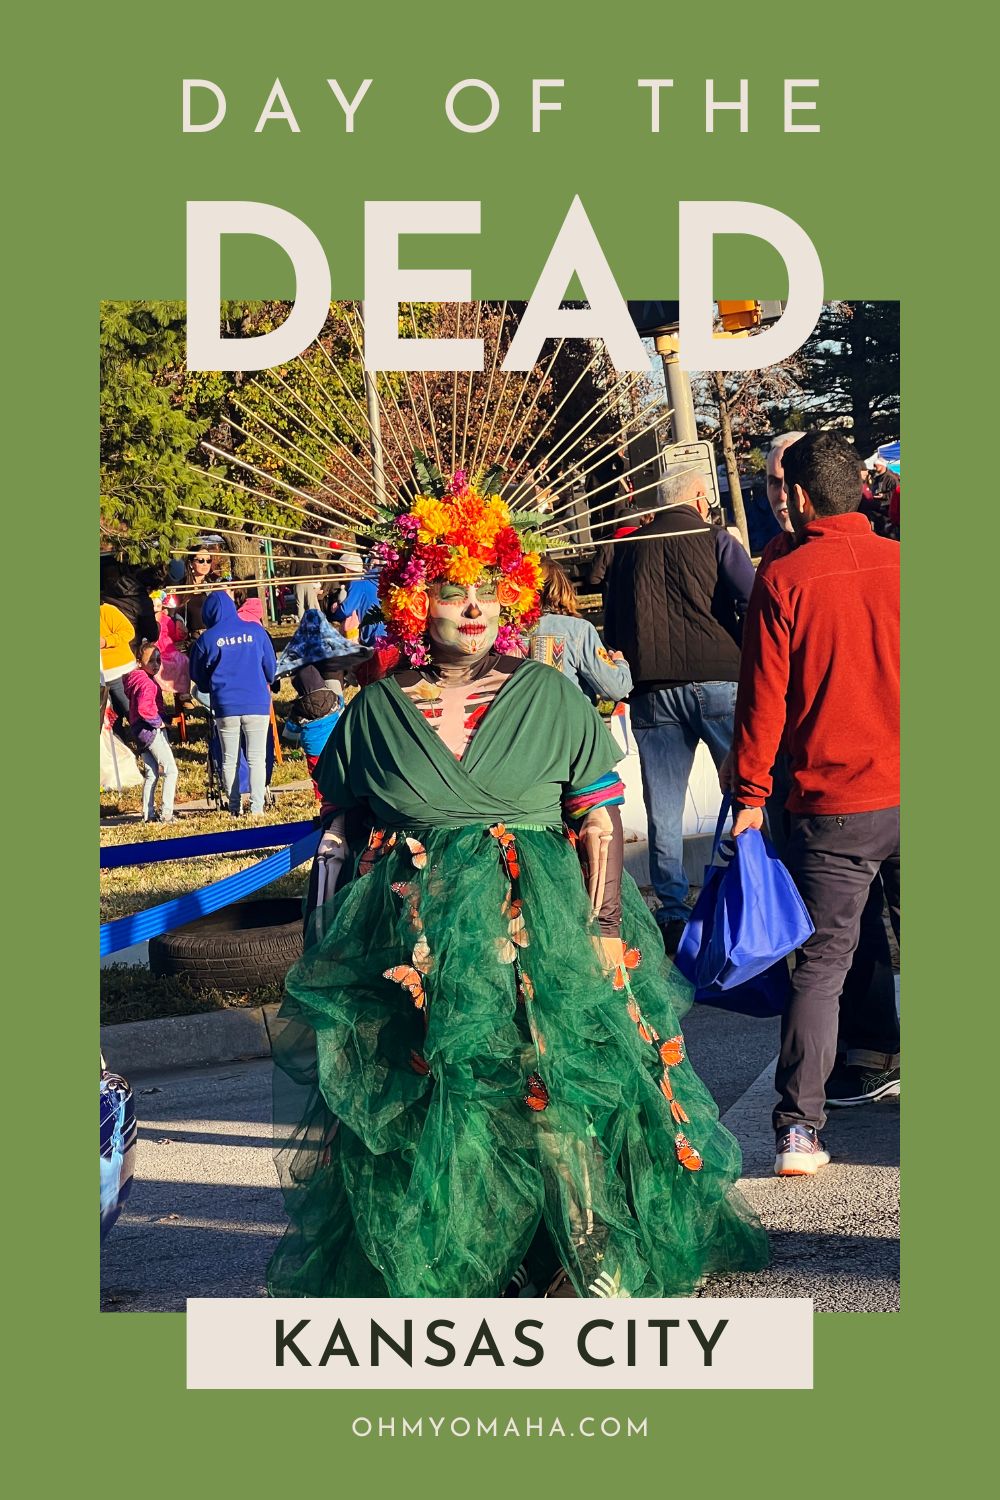 Guide to the Day of the Dead (Día de los Muertos) celebrations in Kansas City, Kansas, include highlights of the amazing parade held in the fall